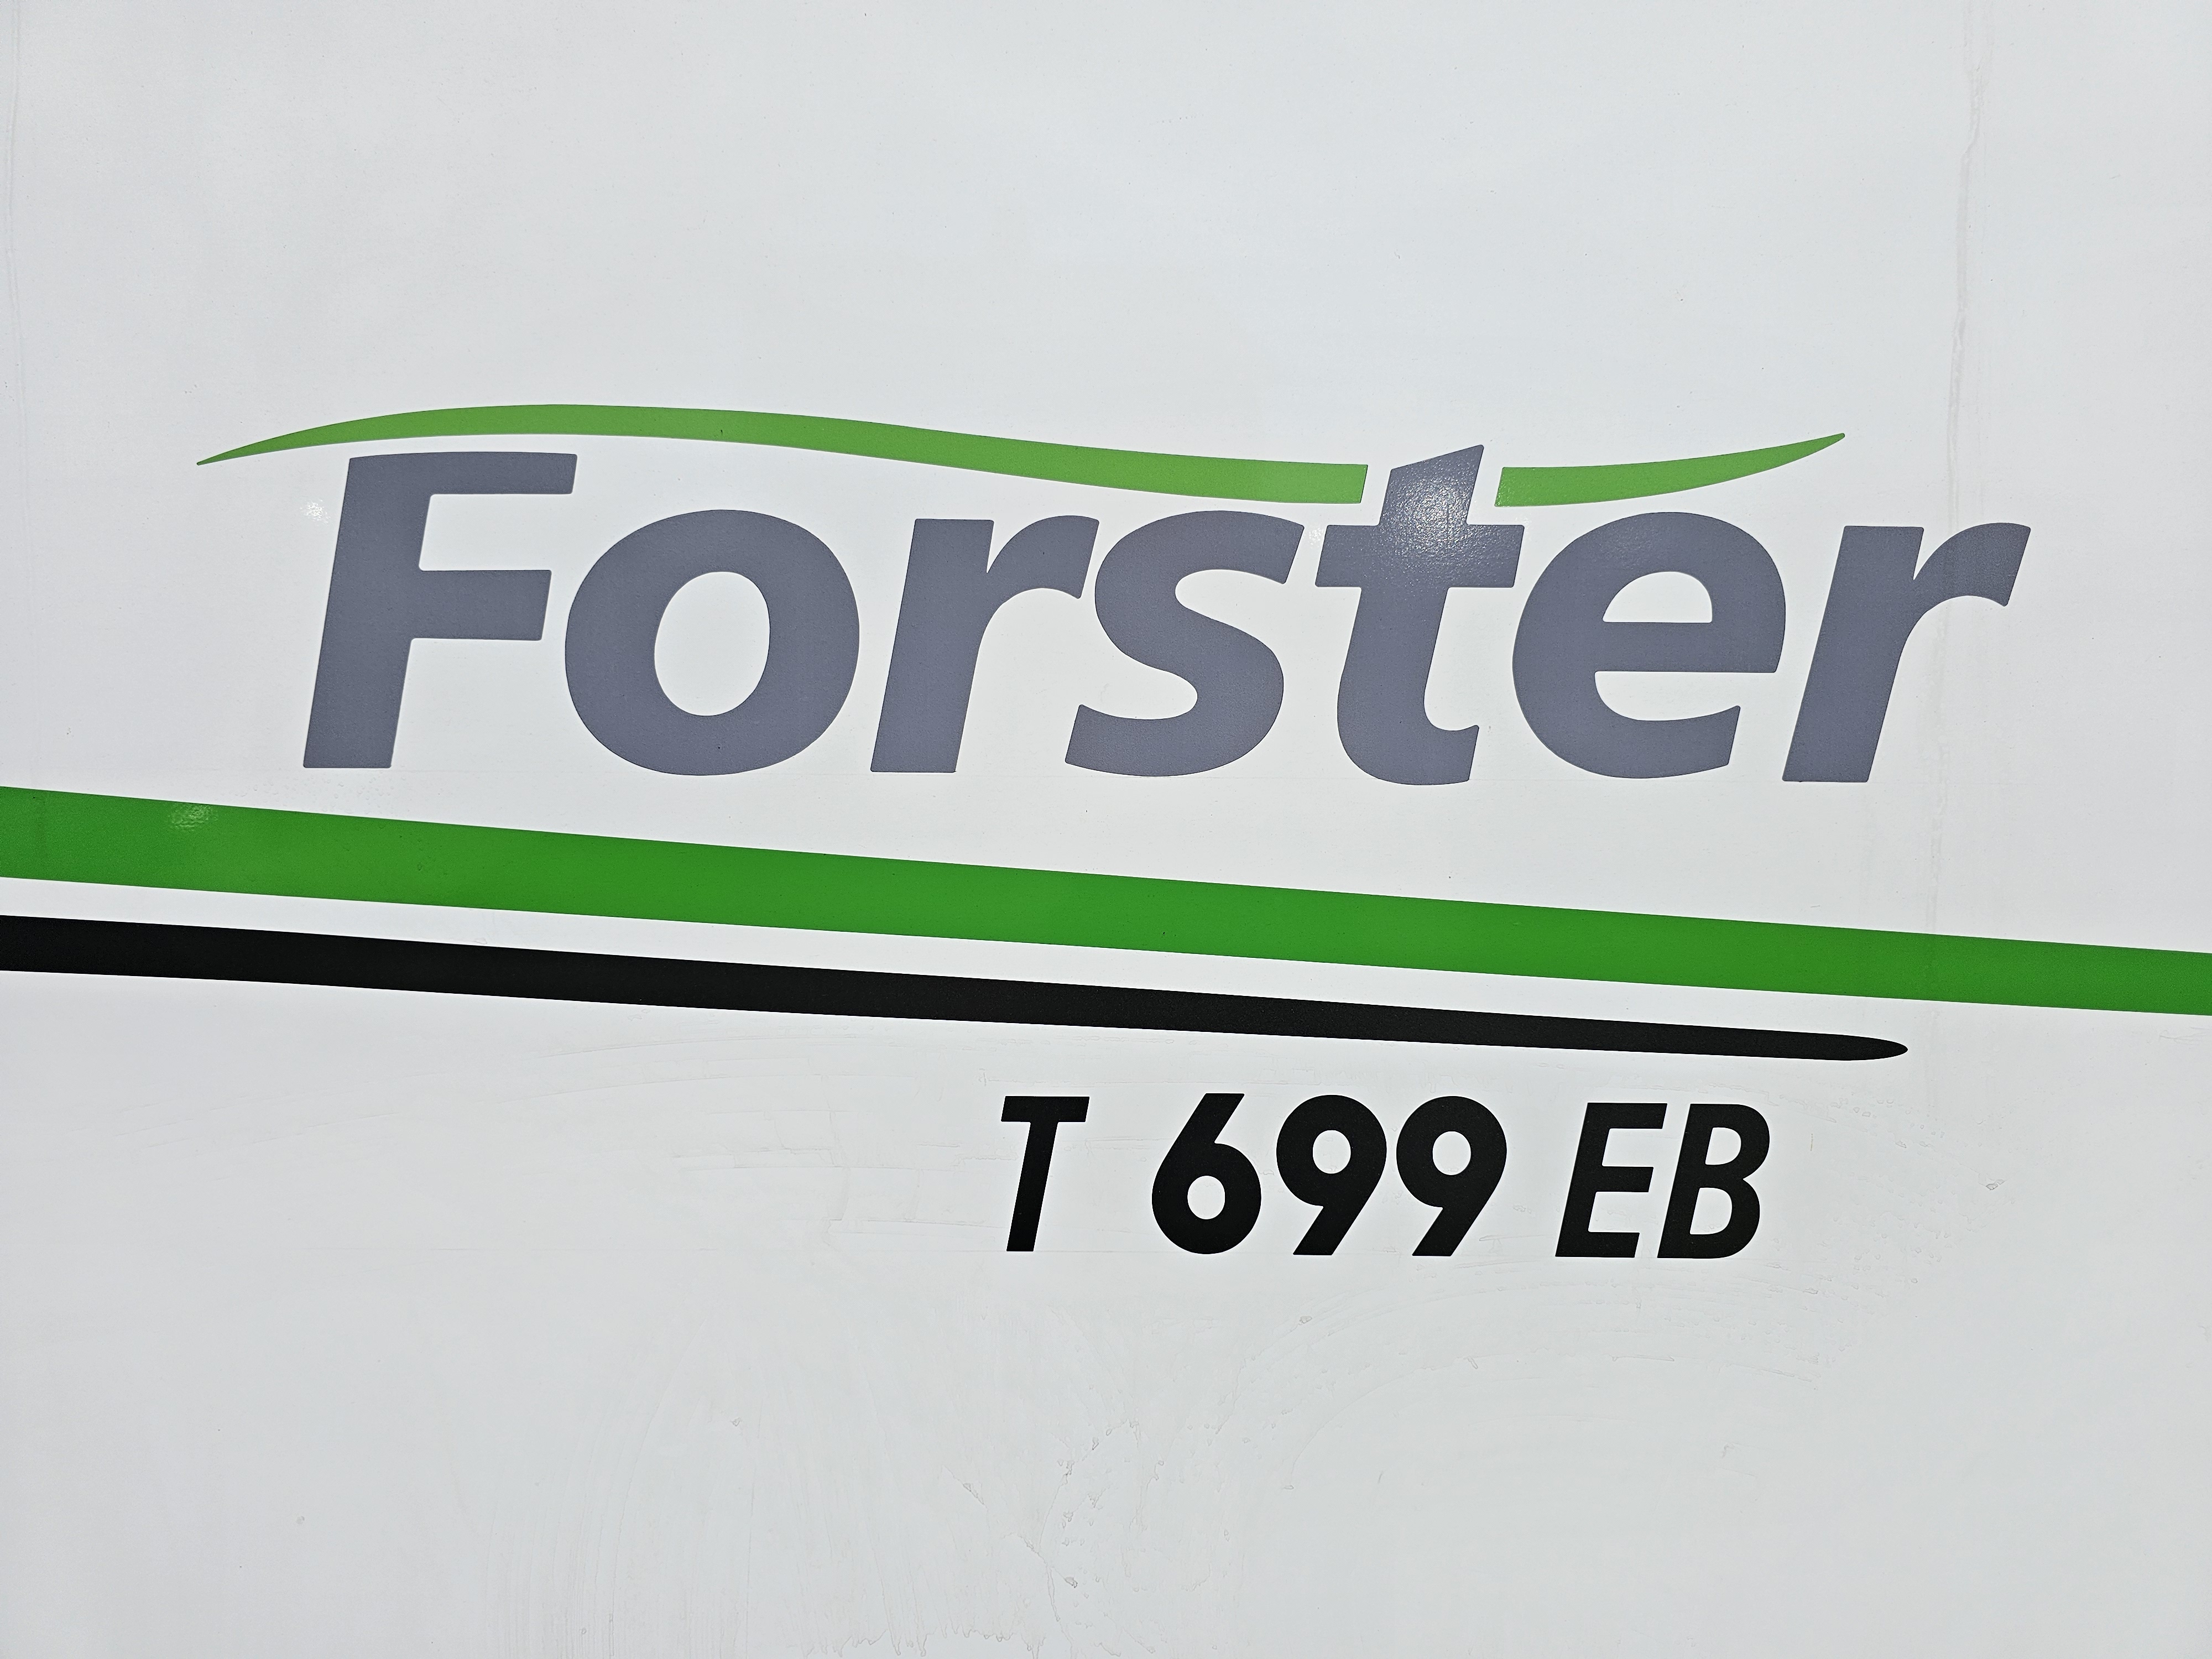 Forster T 699 EB